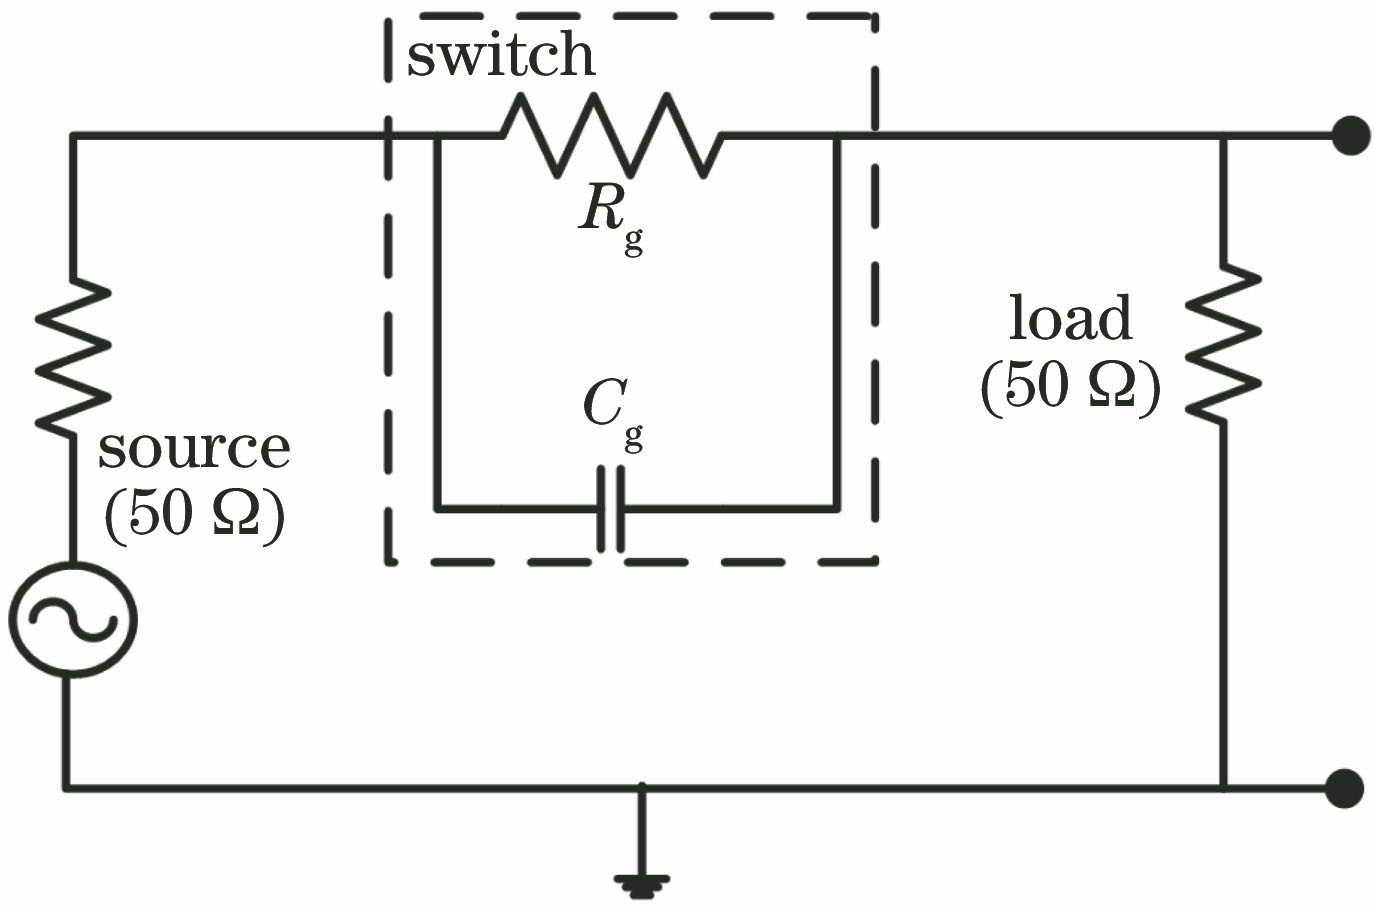 Lumped circuit model of photoconductive switch